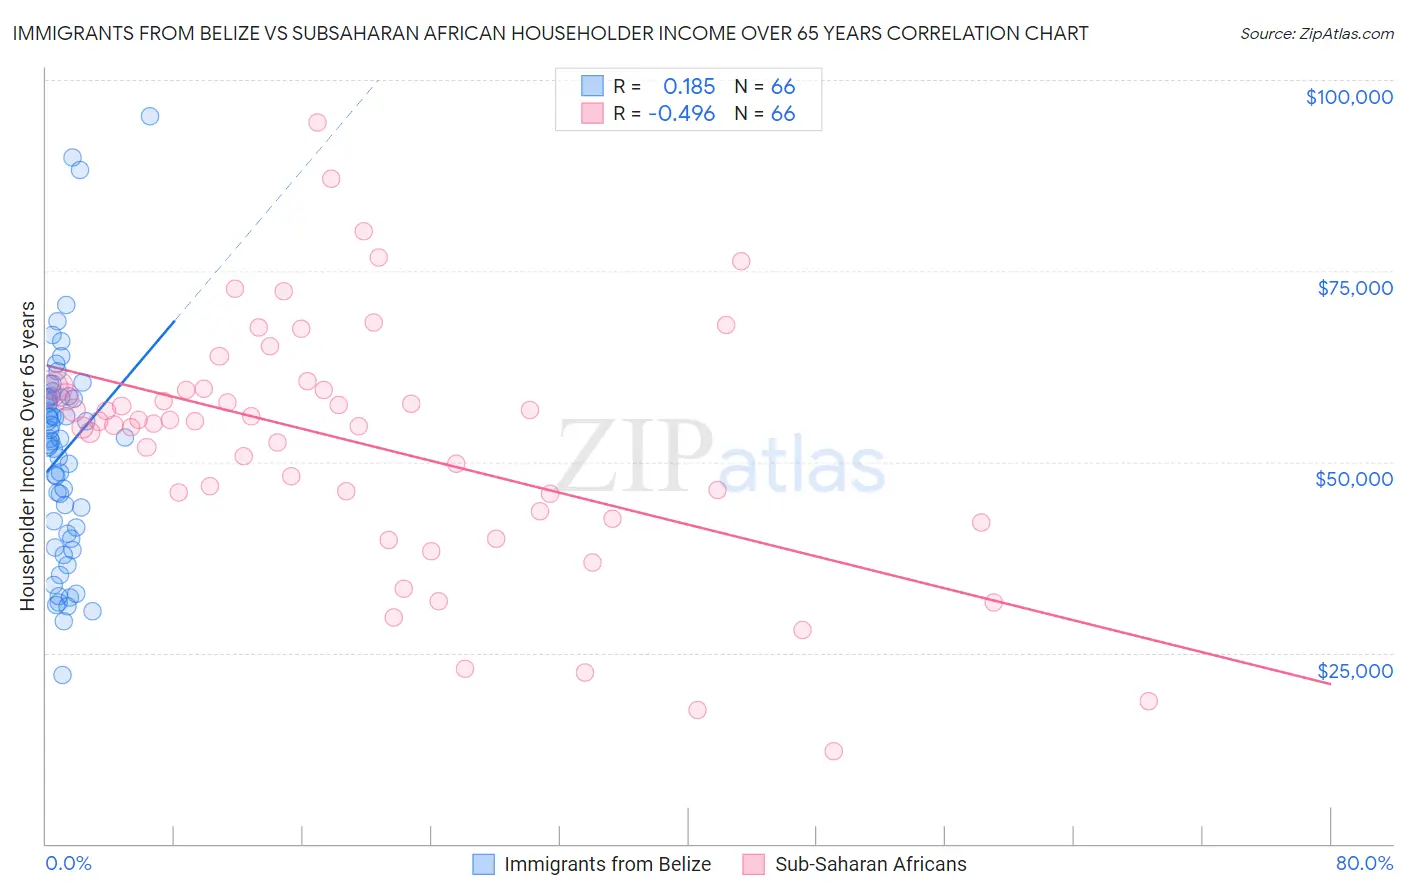 Immigrants from Belize vs Subsaharan African Householder Income Over 65 years